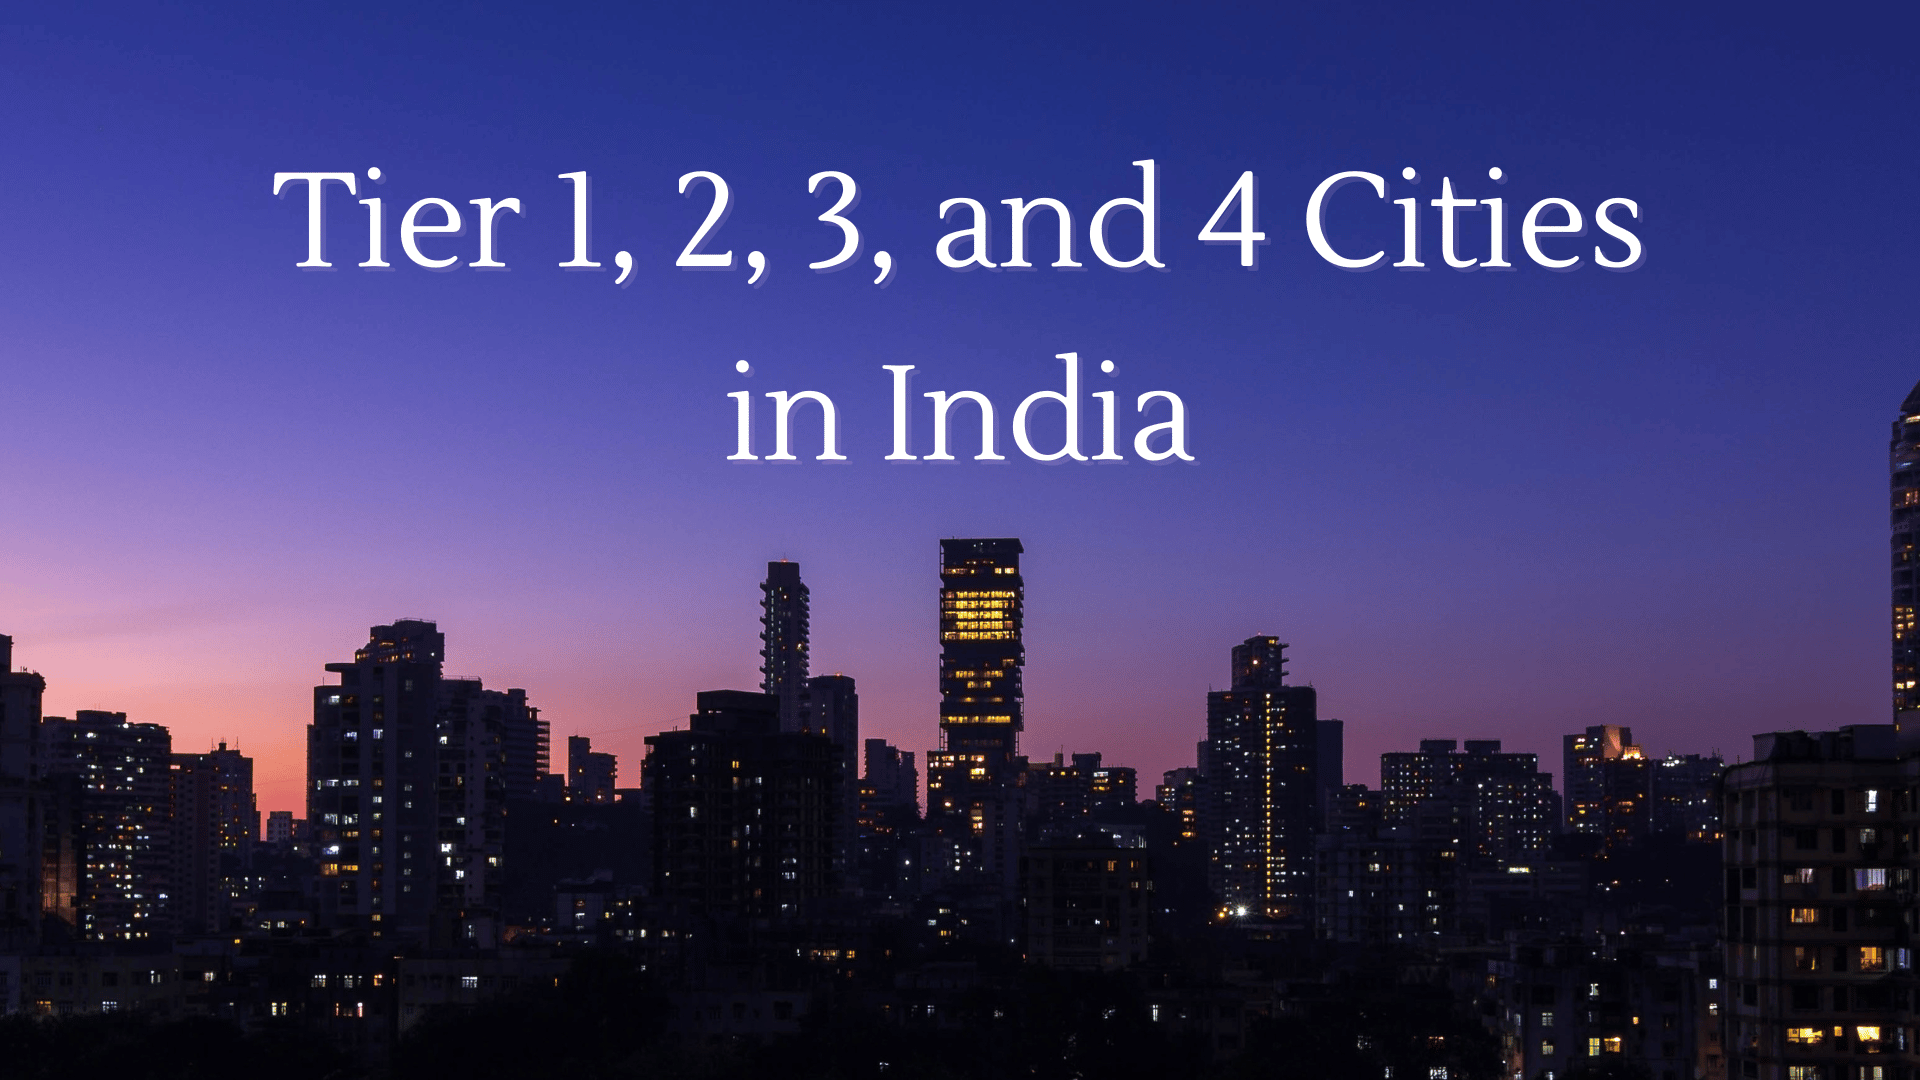 Tier 1, 2, 3, and 4 Cities in India